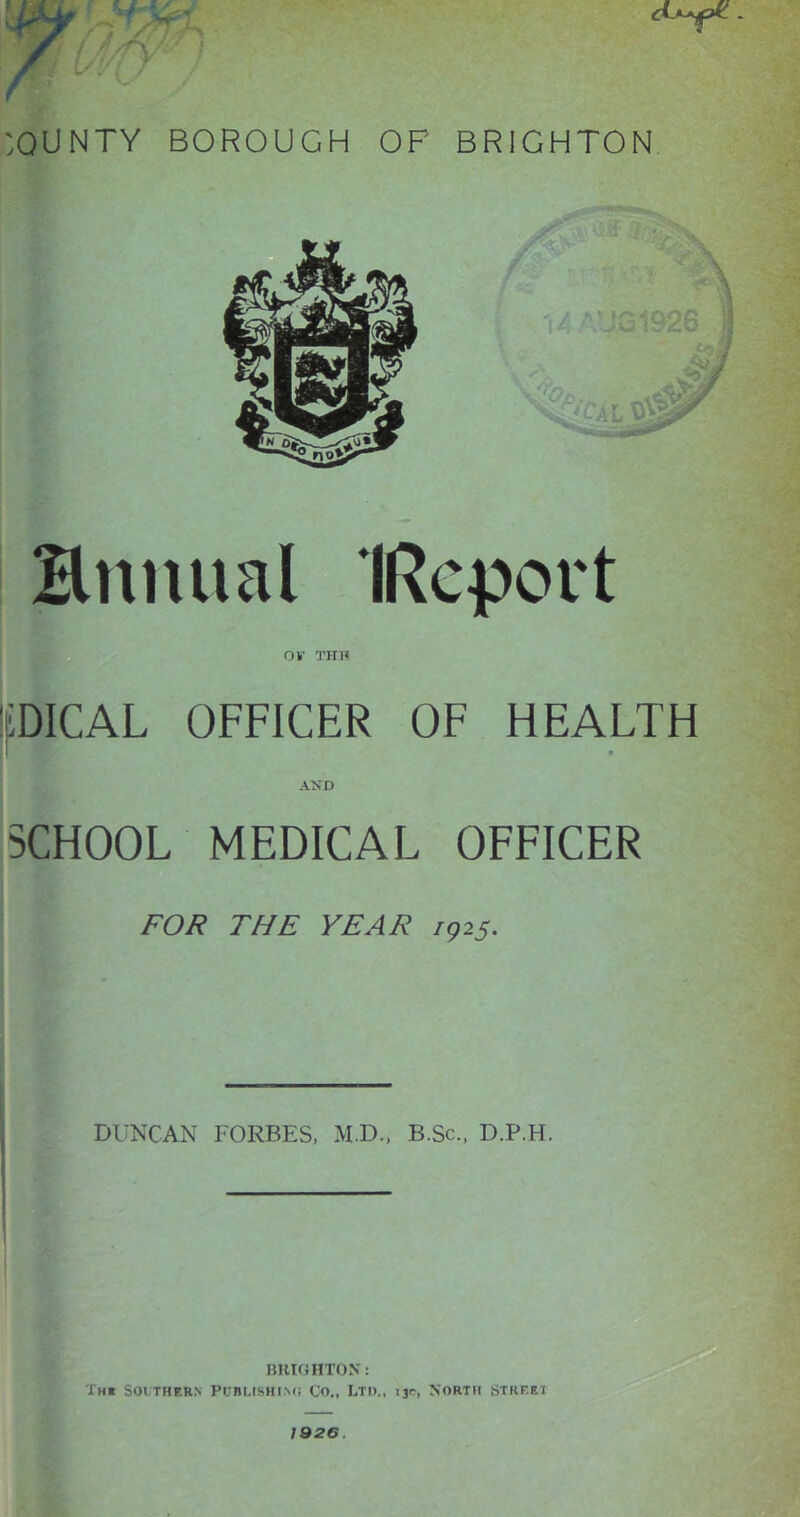 :OUNTY BOROUGH OP BRIGHTON Snmial IRepovt 0¥ THO pICAL OFFICER OF HEALTH AND SCHOOL MEDICAL OFFICER FOR THE YEAR 7925. DUNCAN FORBES, M.D.. B.Sc., D.P.H. IJHKJHTON: The Southern Puni,isHi.N<i Co., Ltd., 13c, NoRTit Street